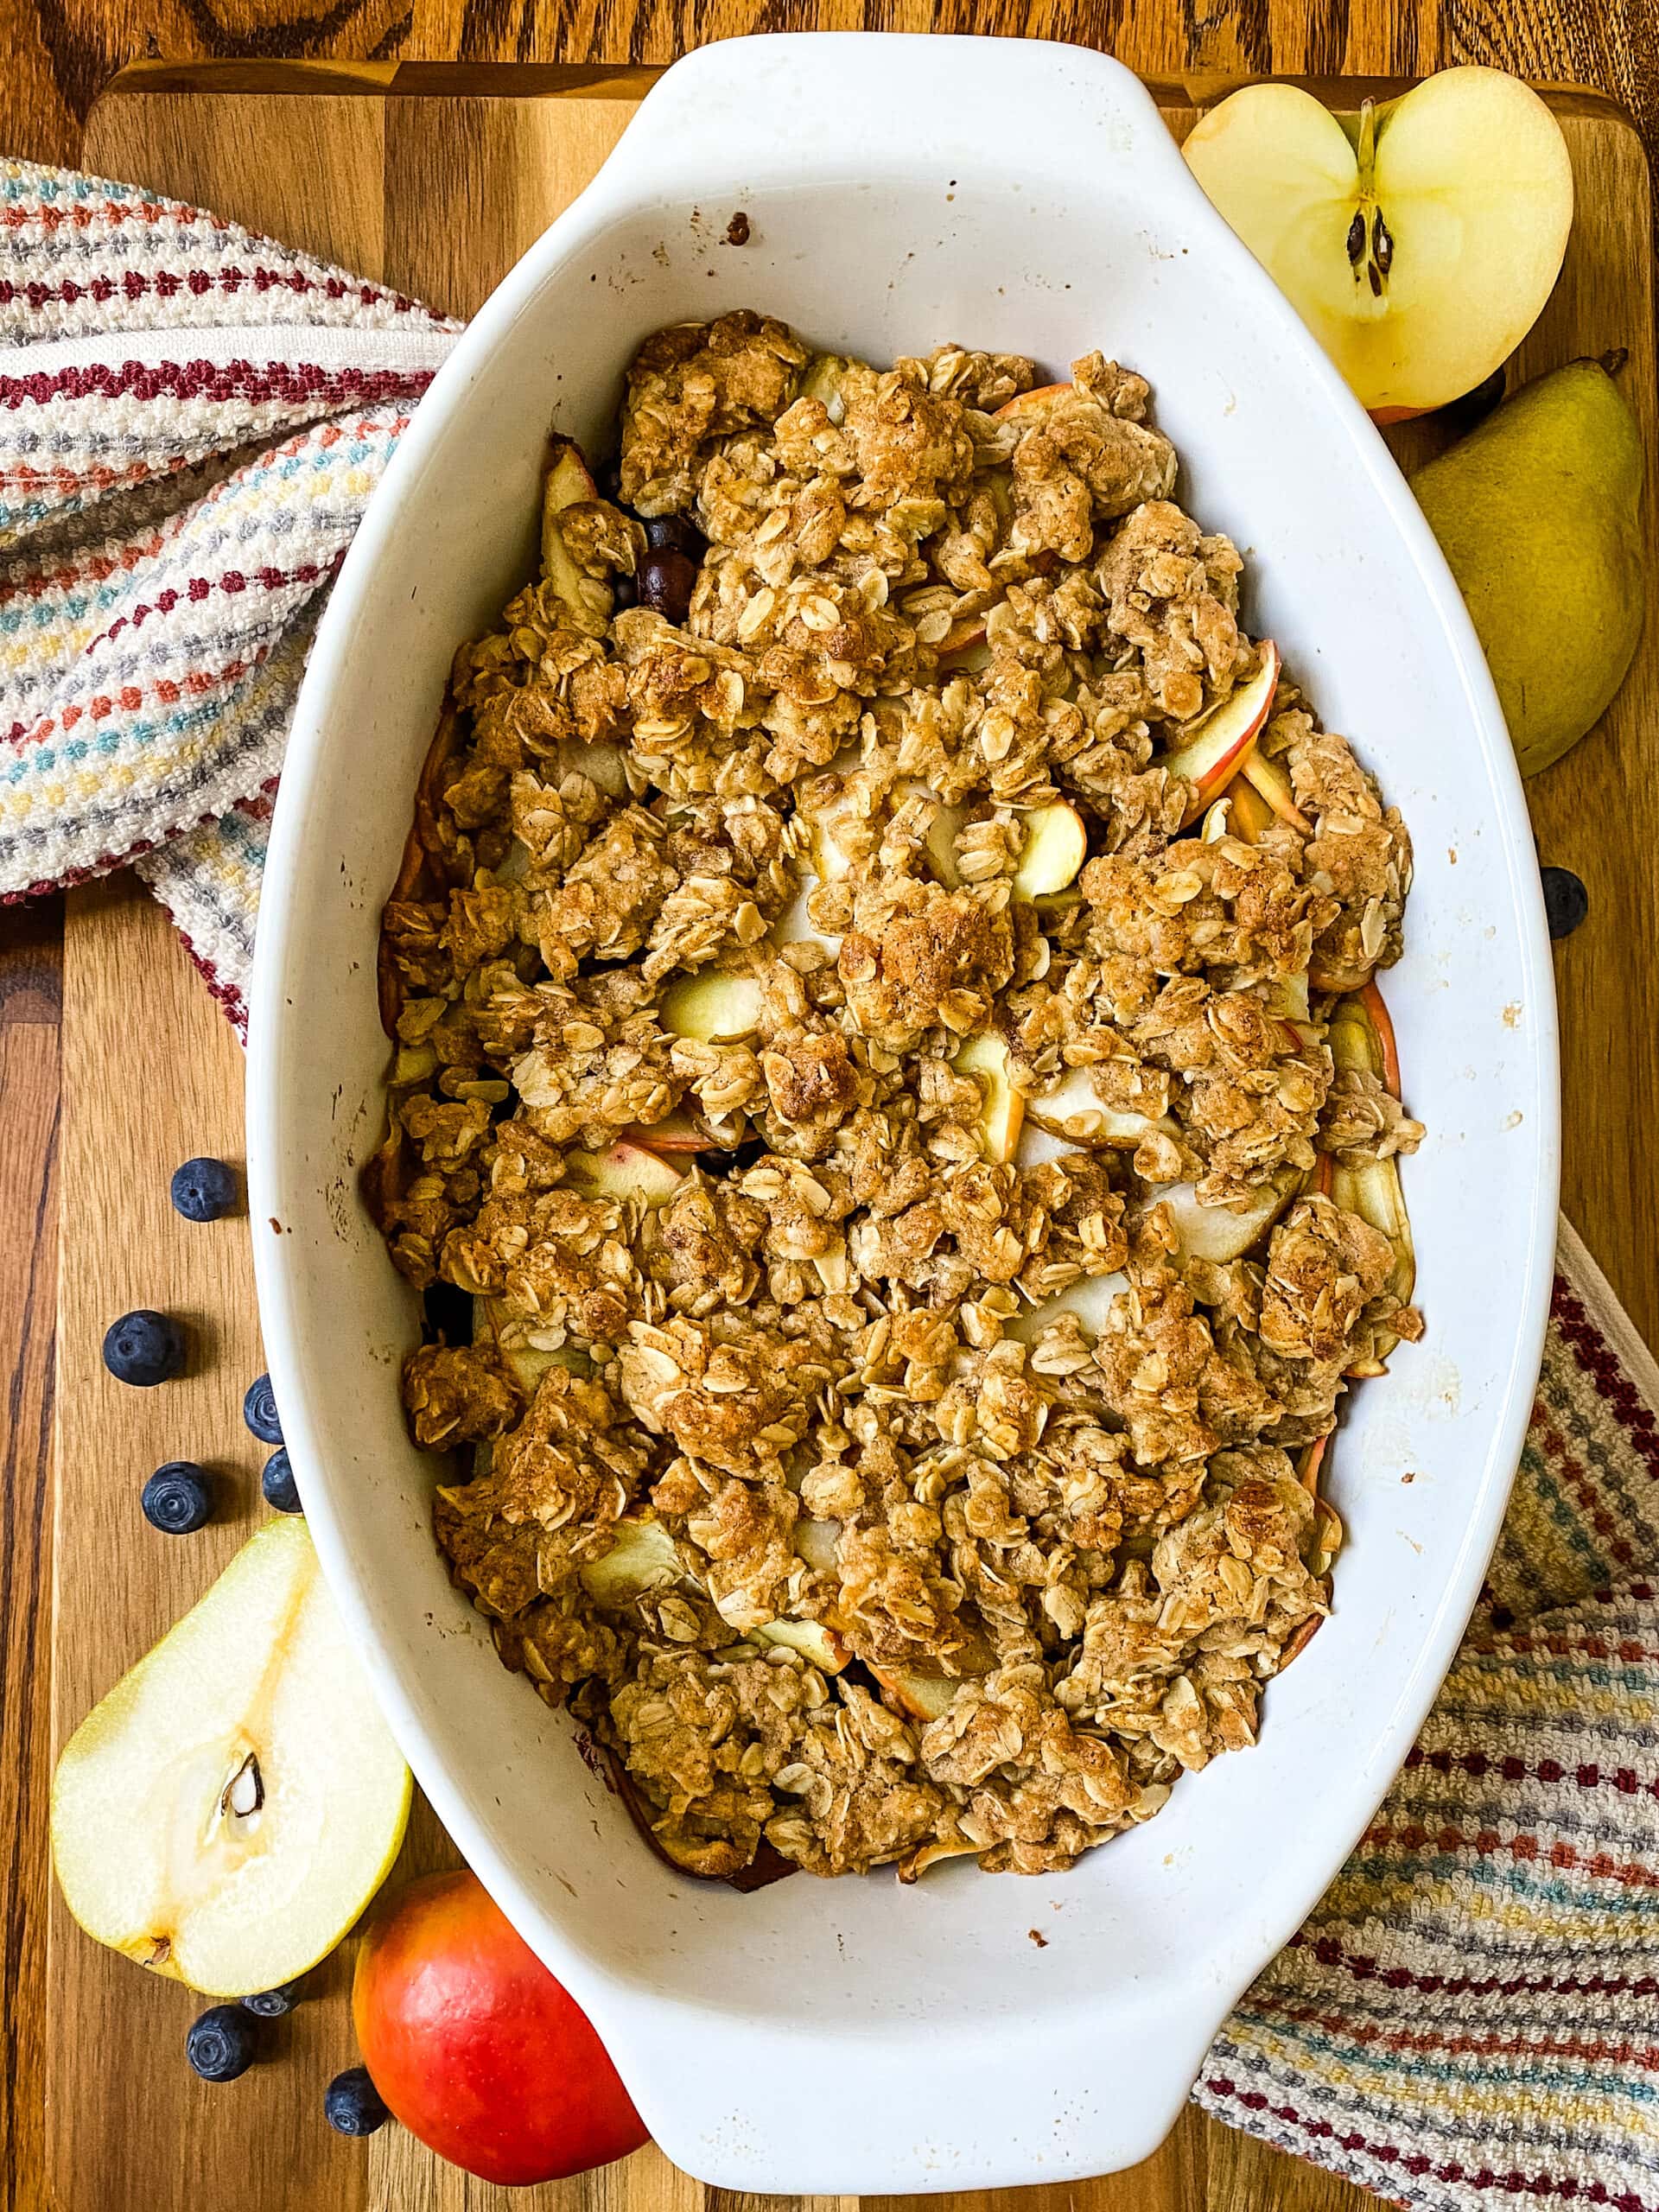 Apple, Pear, And Blueberry Crumble